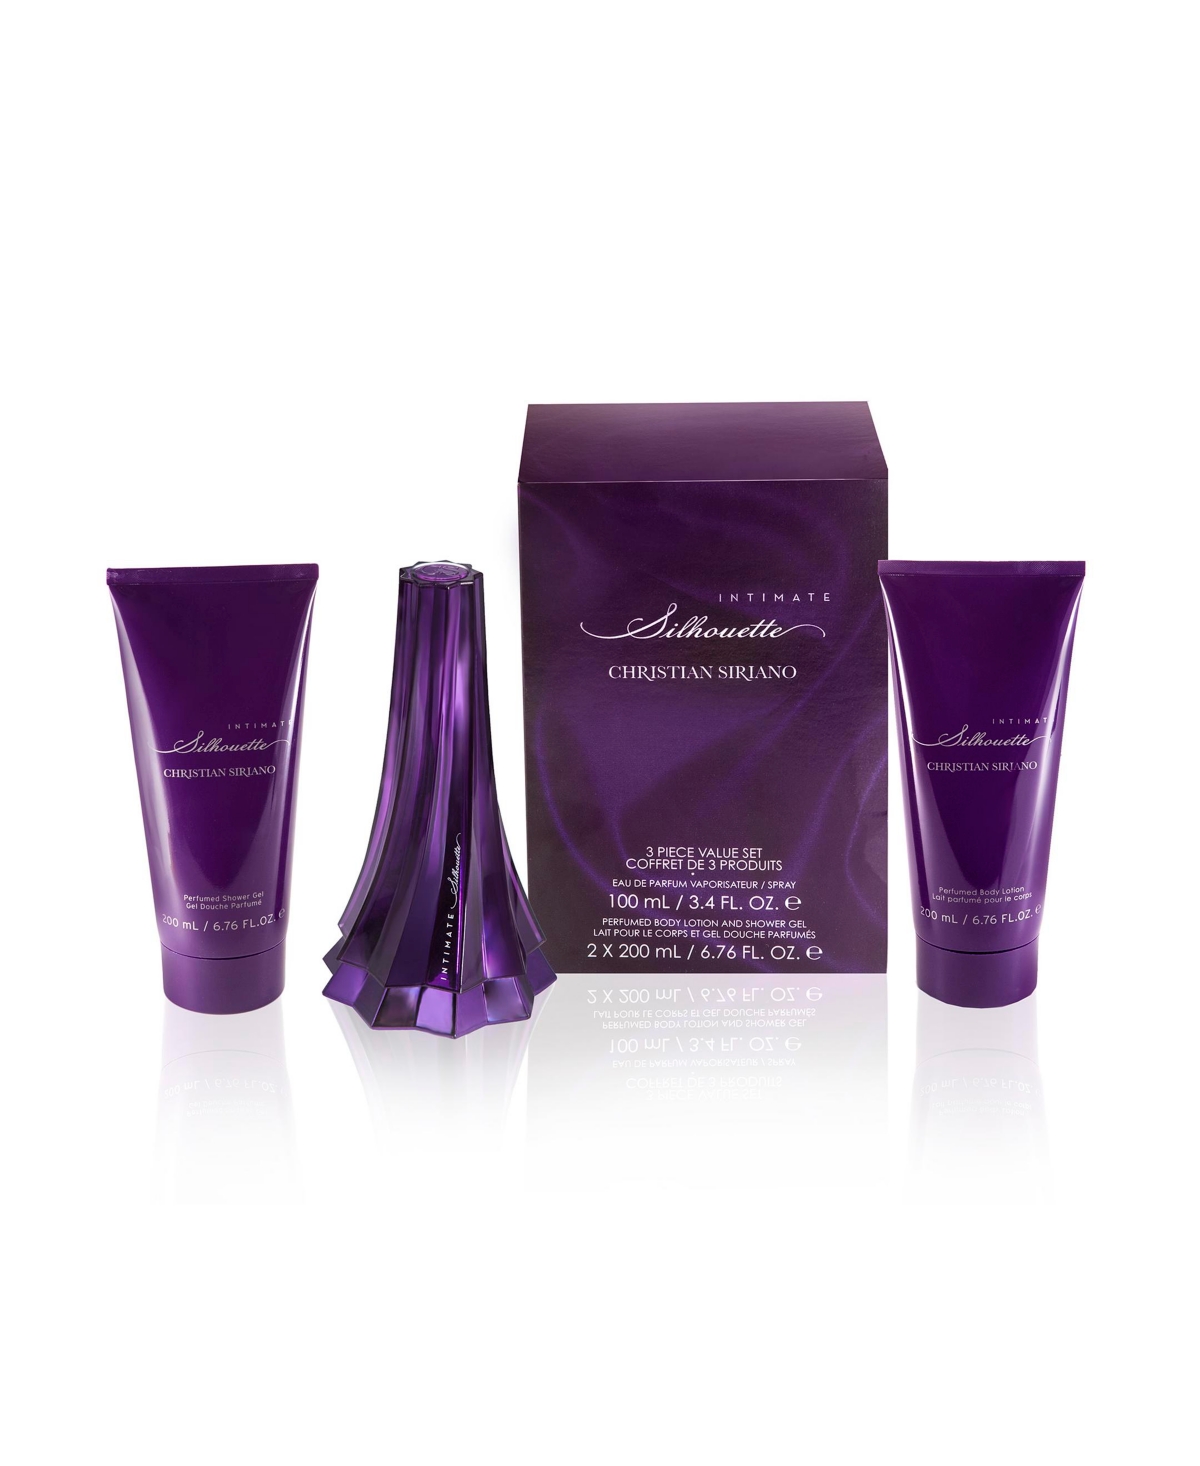 Intimate Silhouette Perfume Gift Set for Women, 3 Pieces